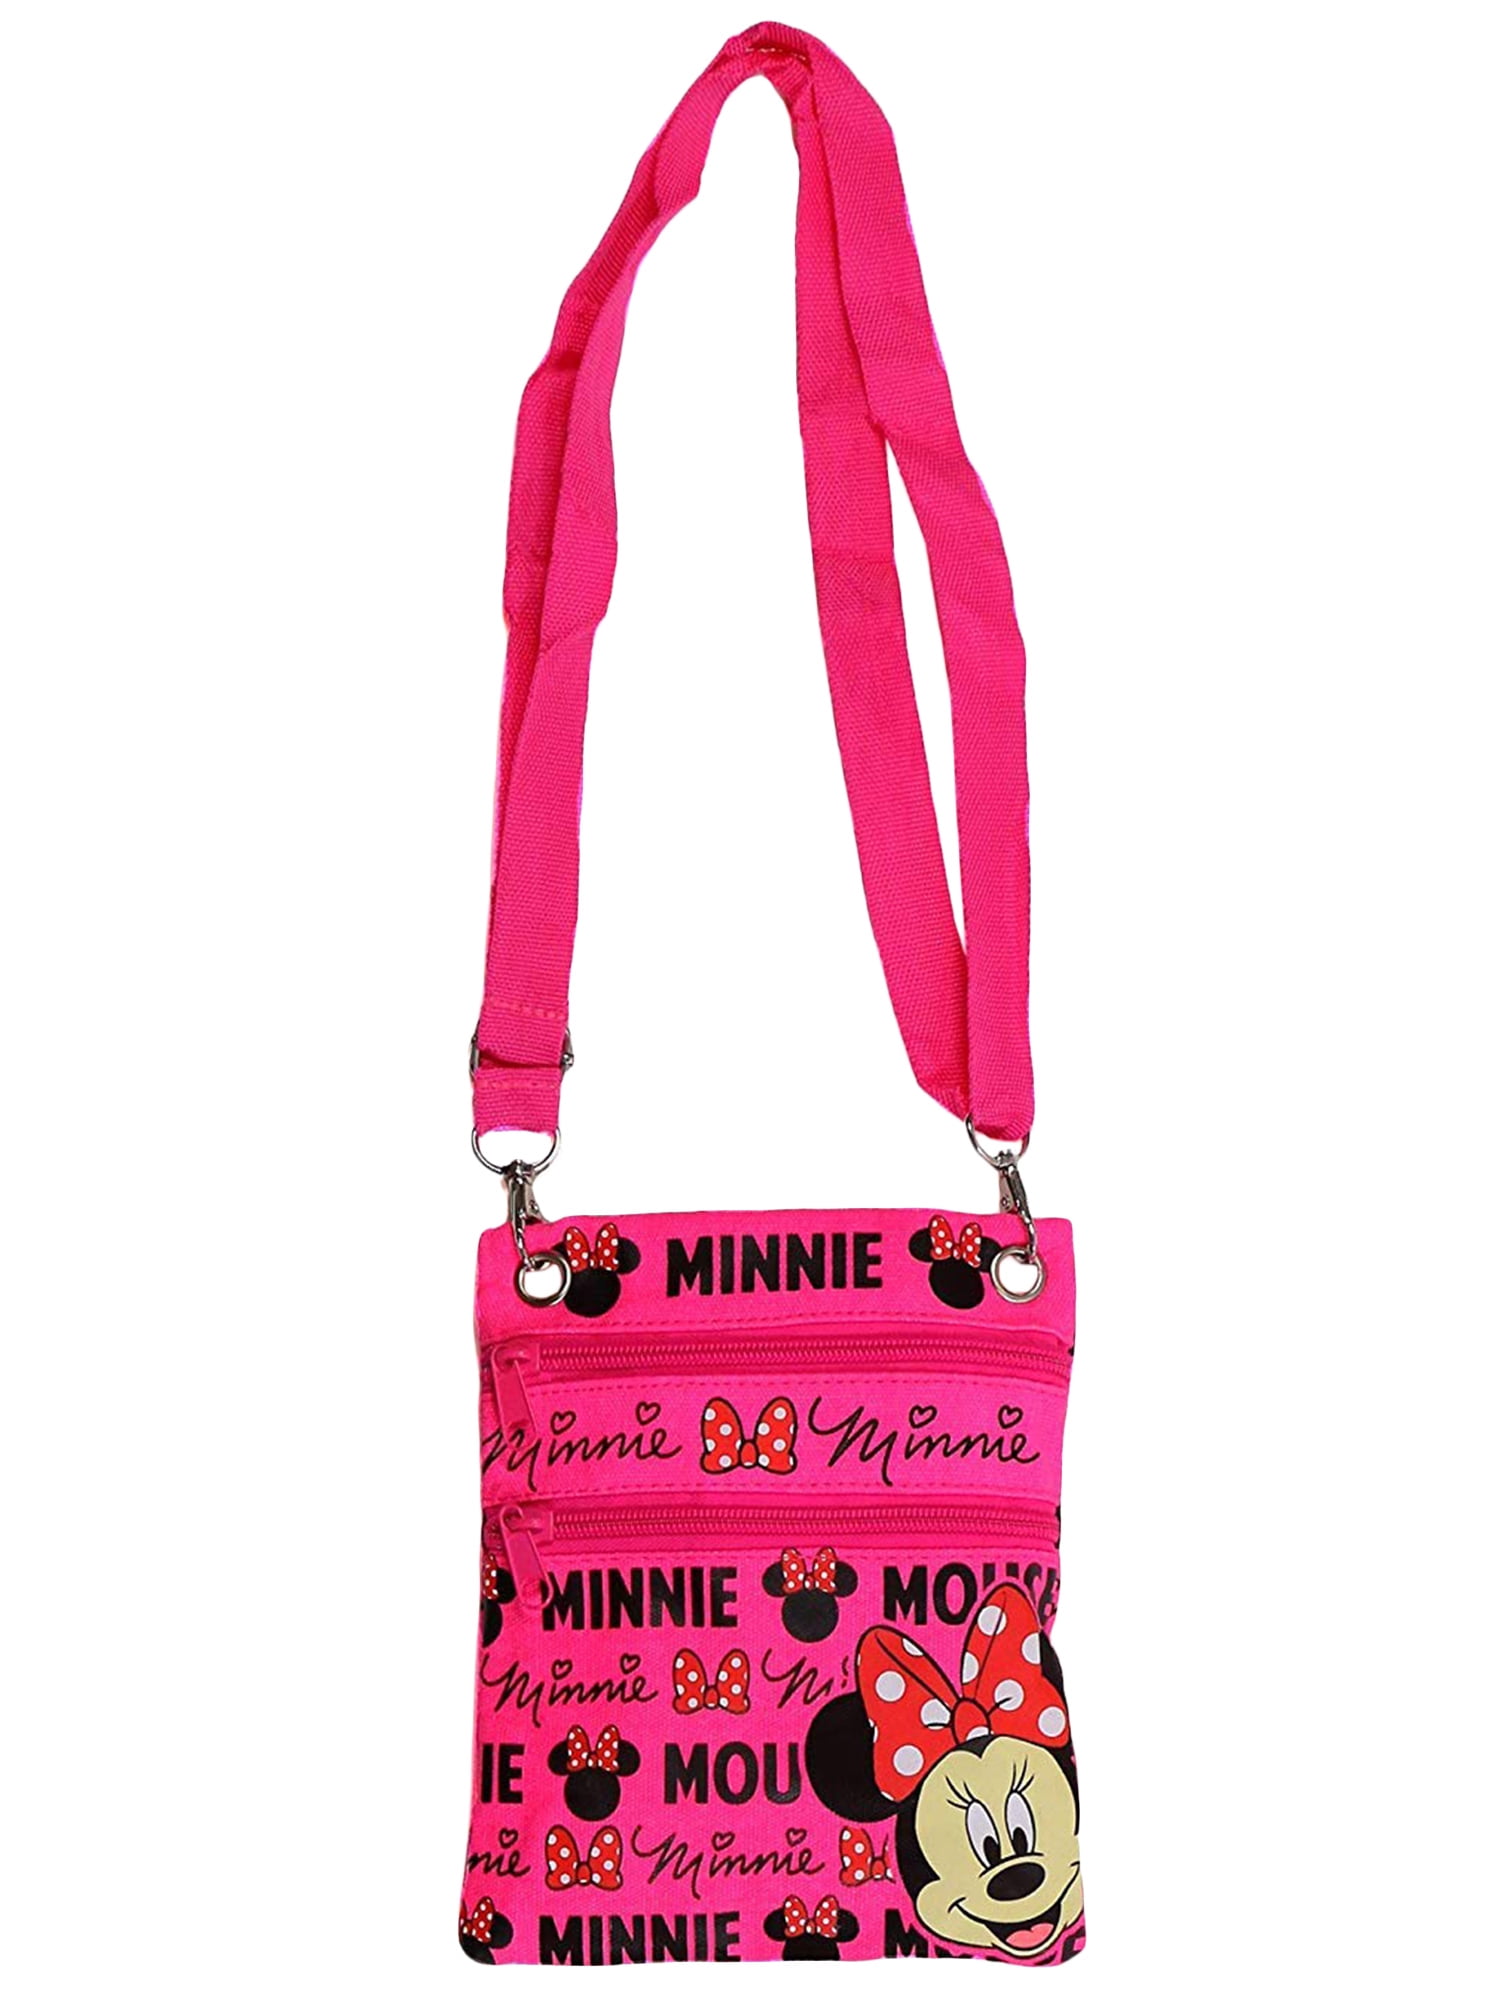 Loungefly Disney Pirate Minnie Mouse Cosplay Women's Backpack Purse,  Multicolor, One Size, Wdbk3244 : Amazon.co.uk: Fashion